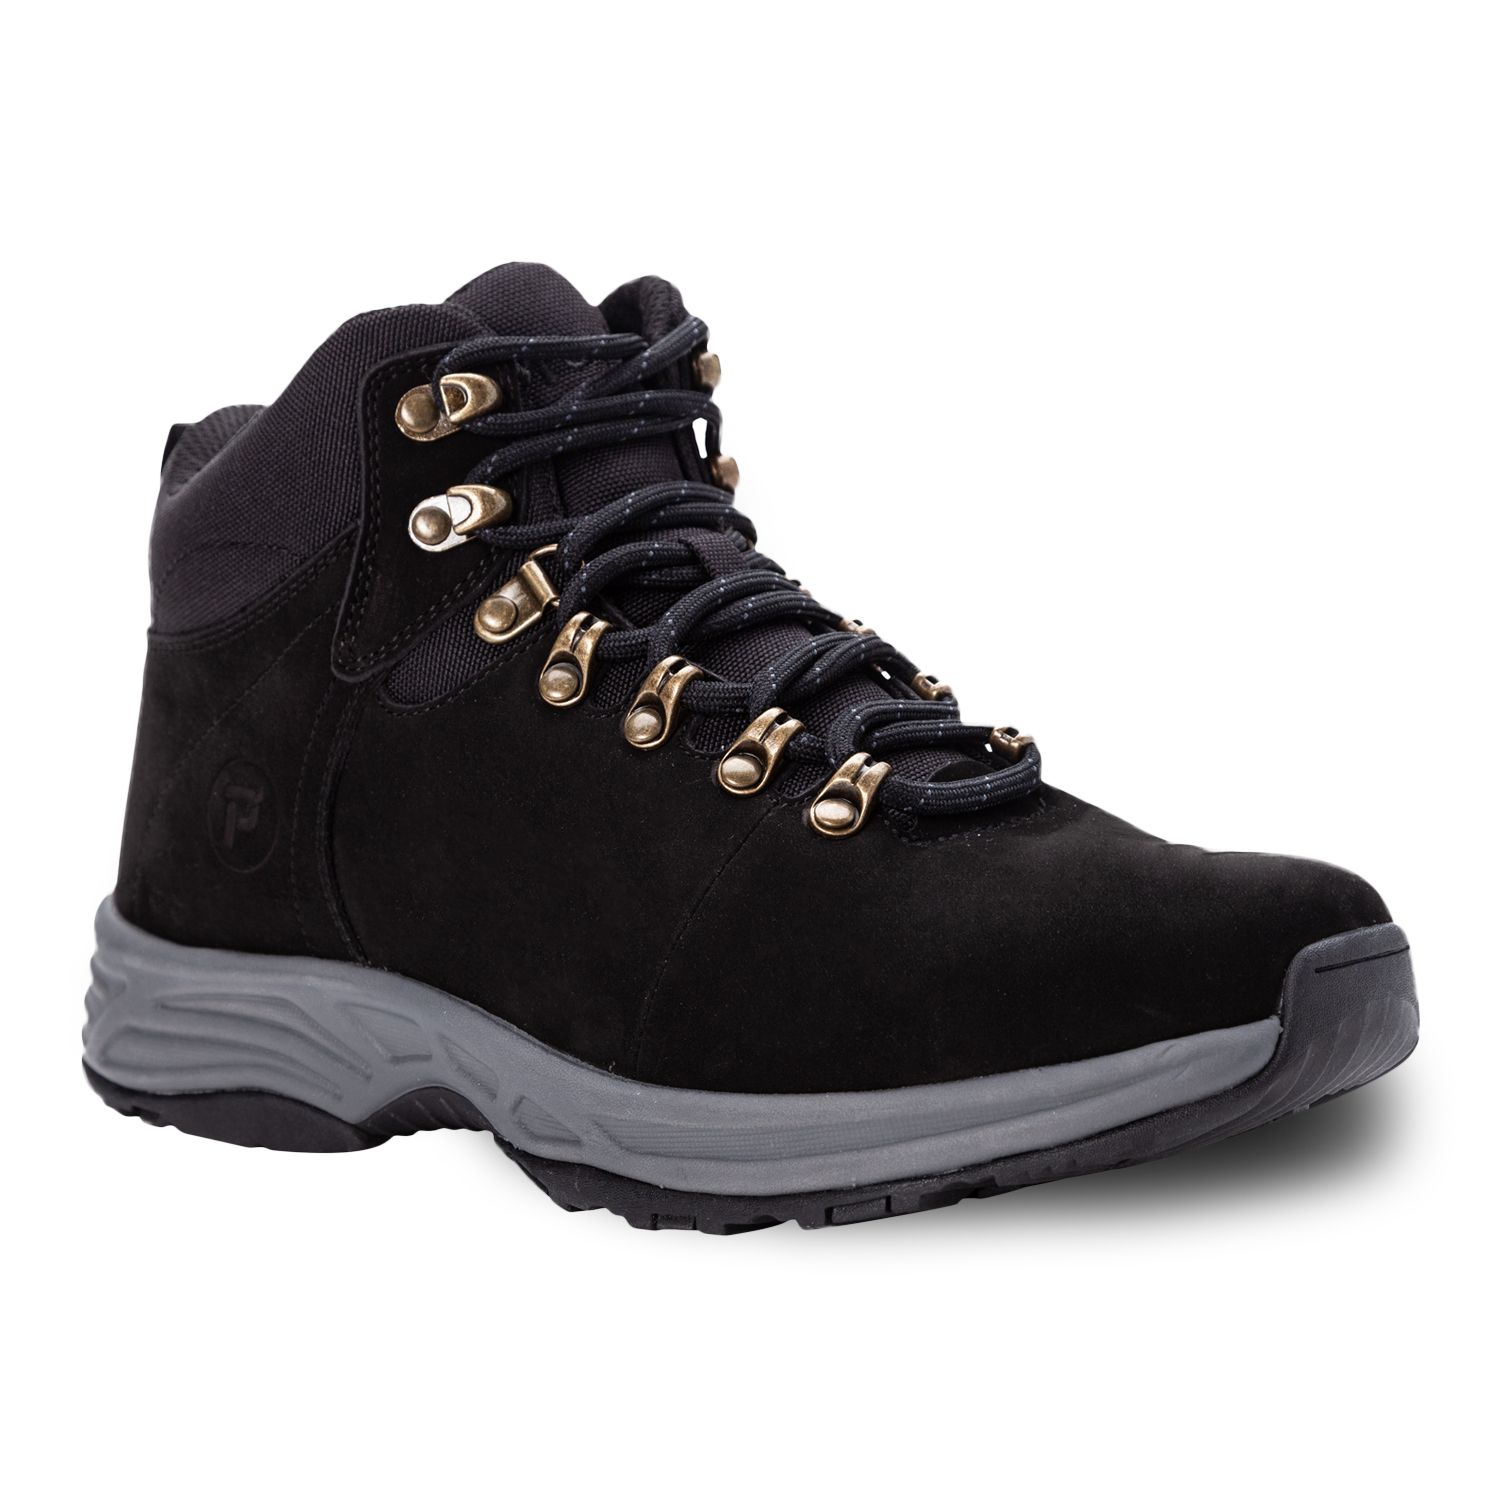 propet hiking boots